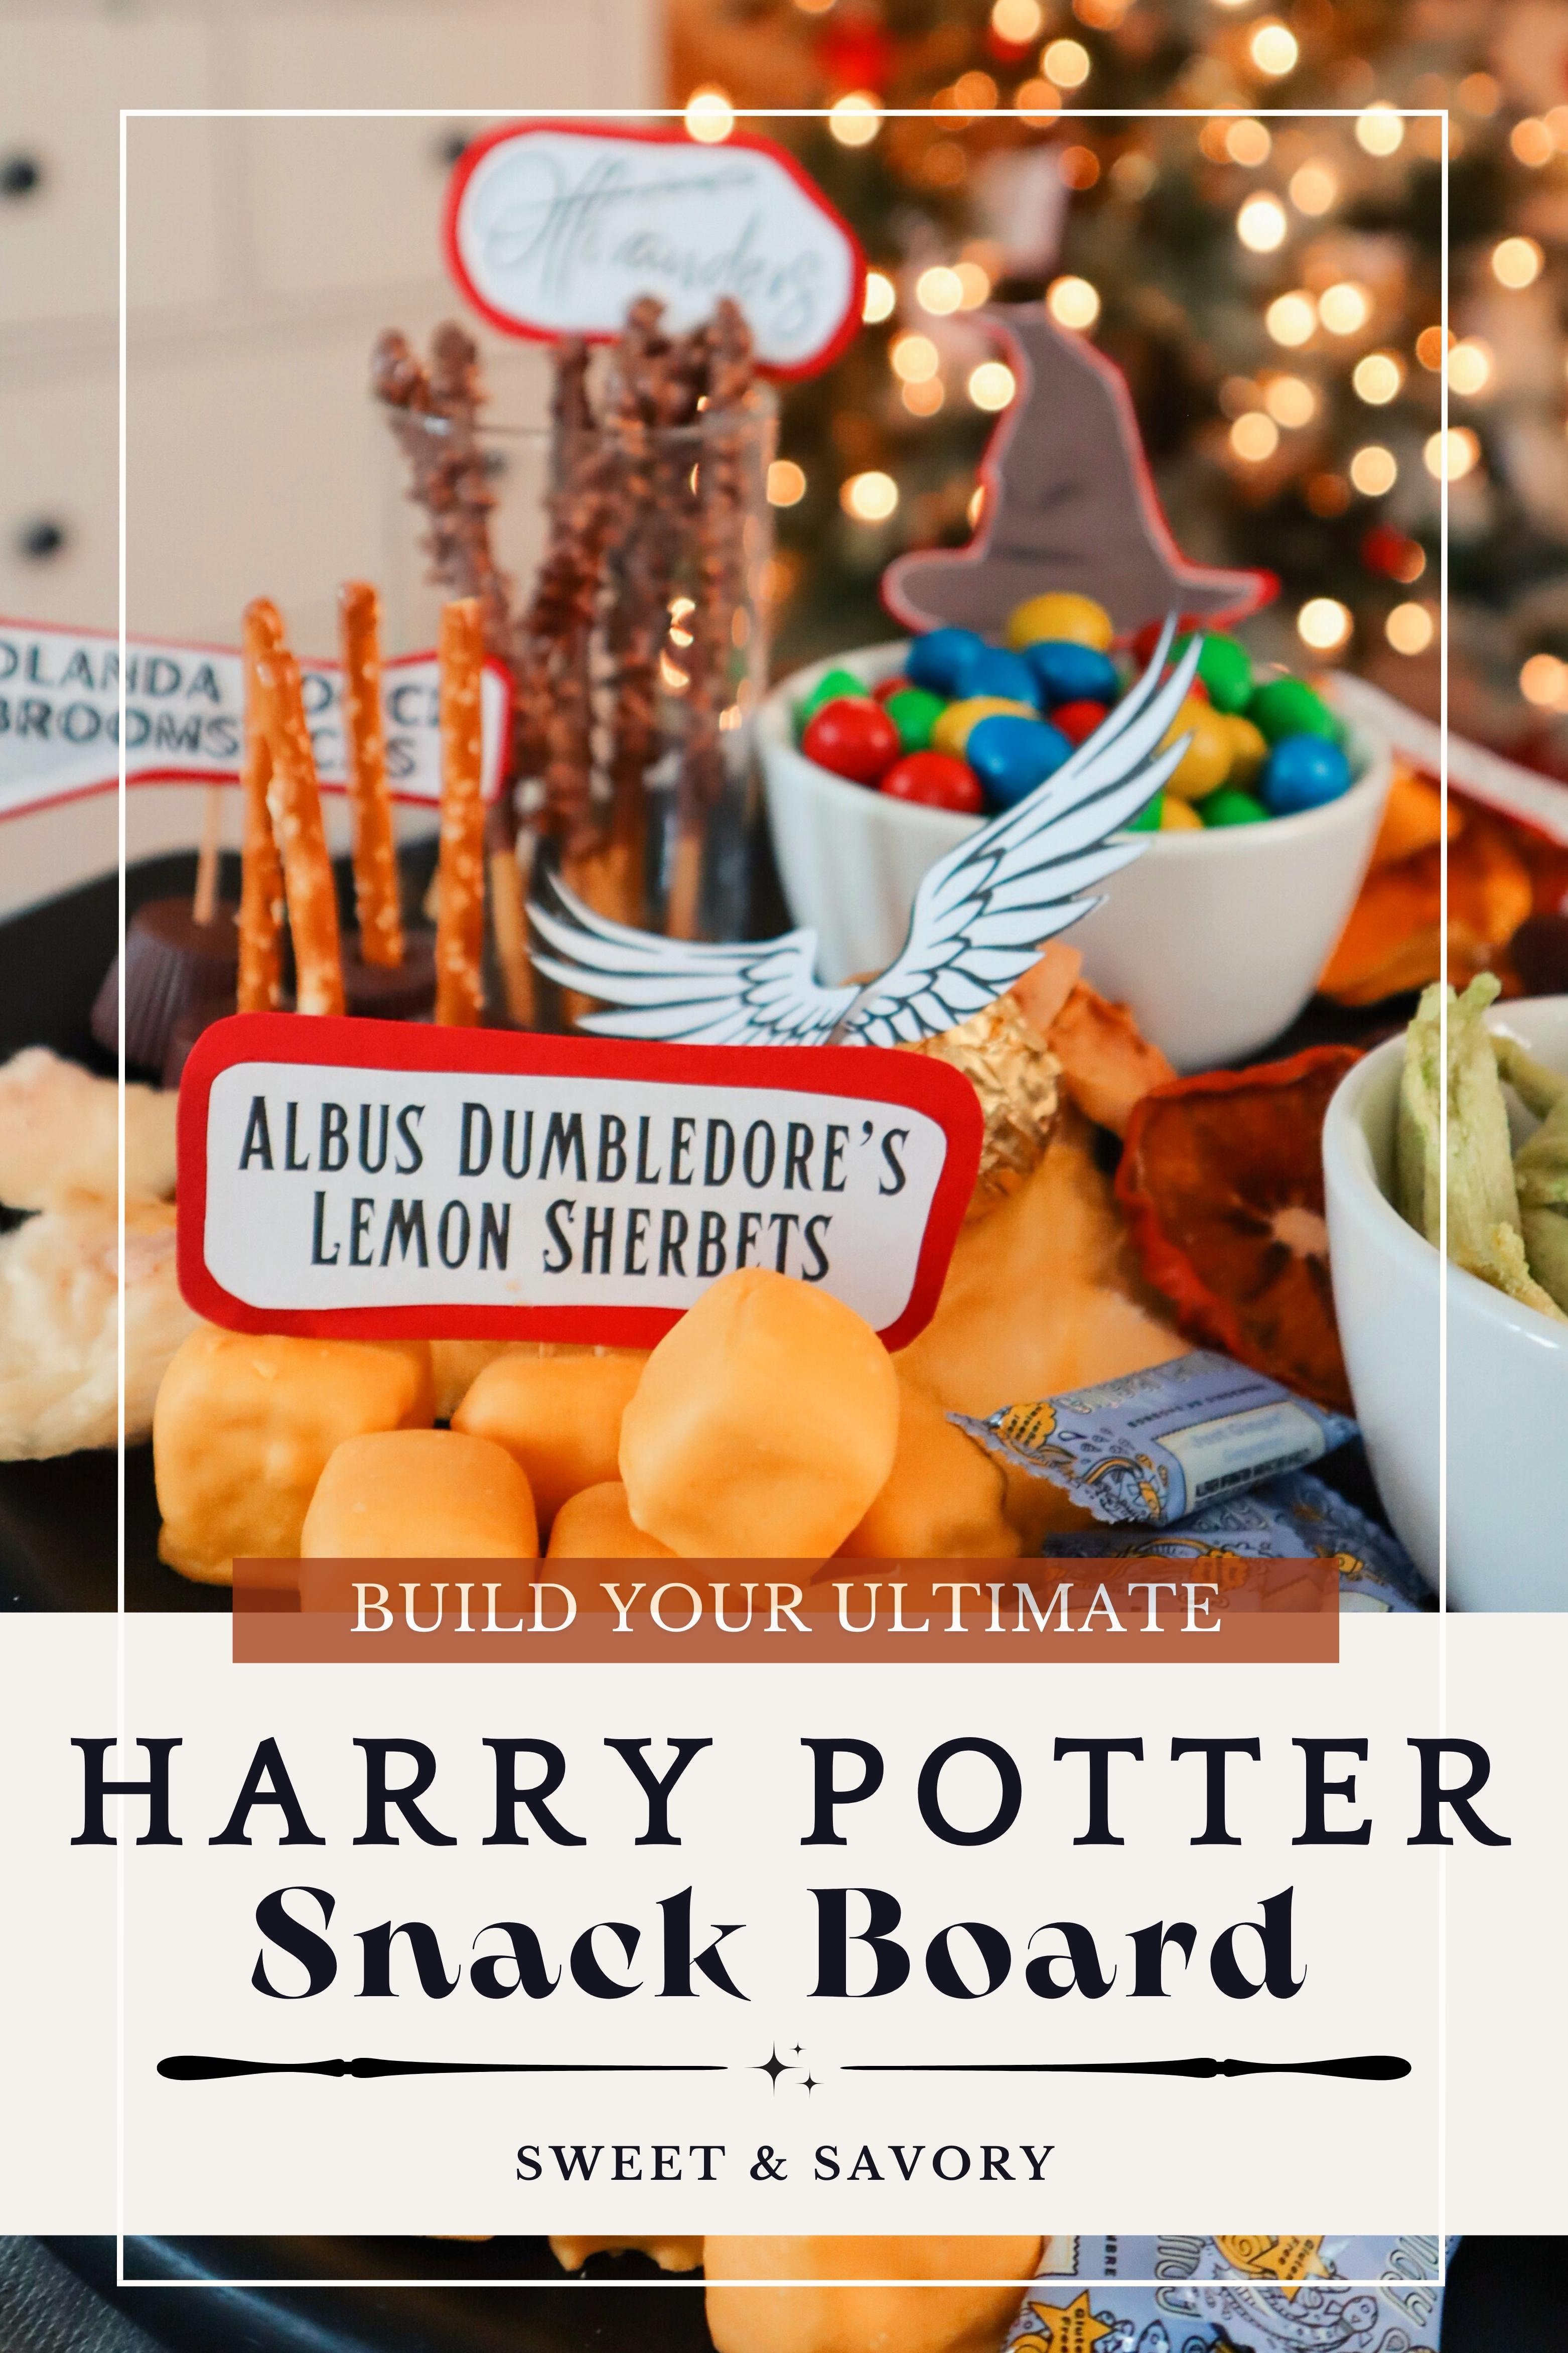 Harry Potter Snack Board (Sweet & Savory) + Free Printable